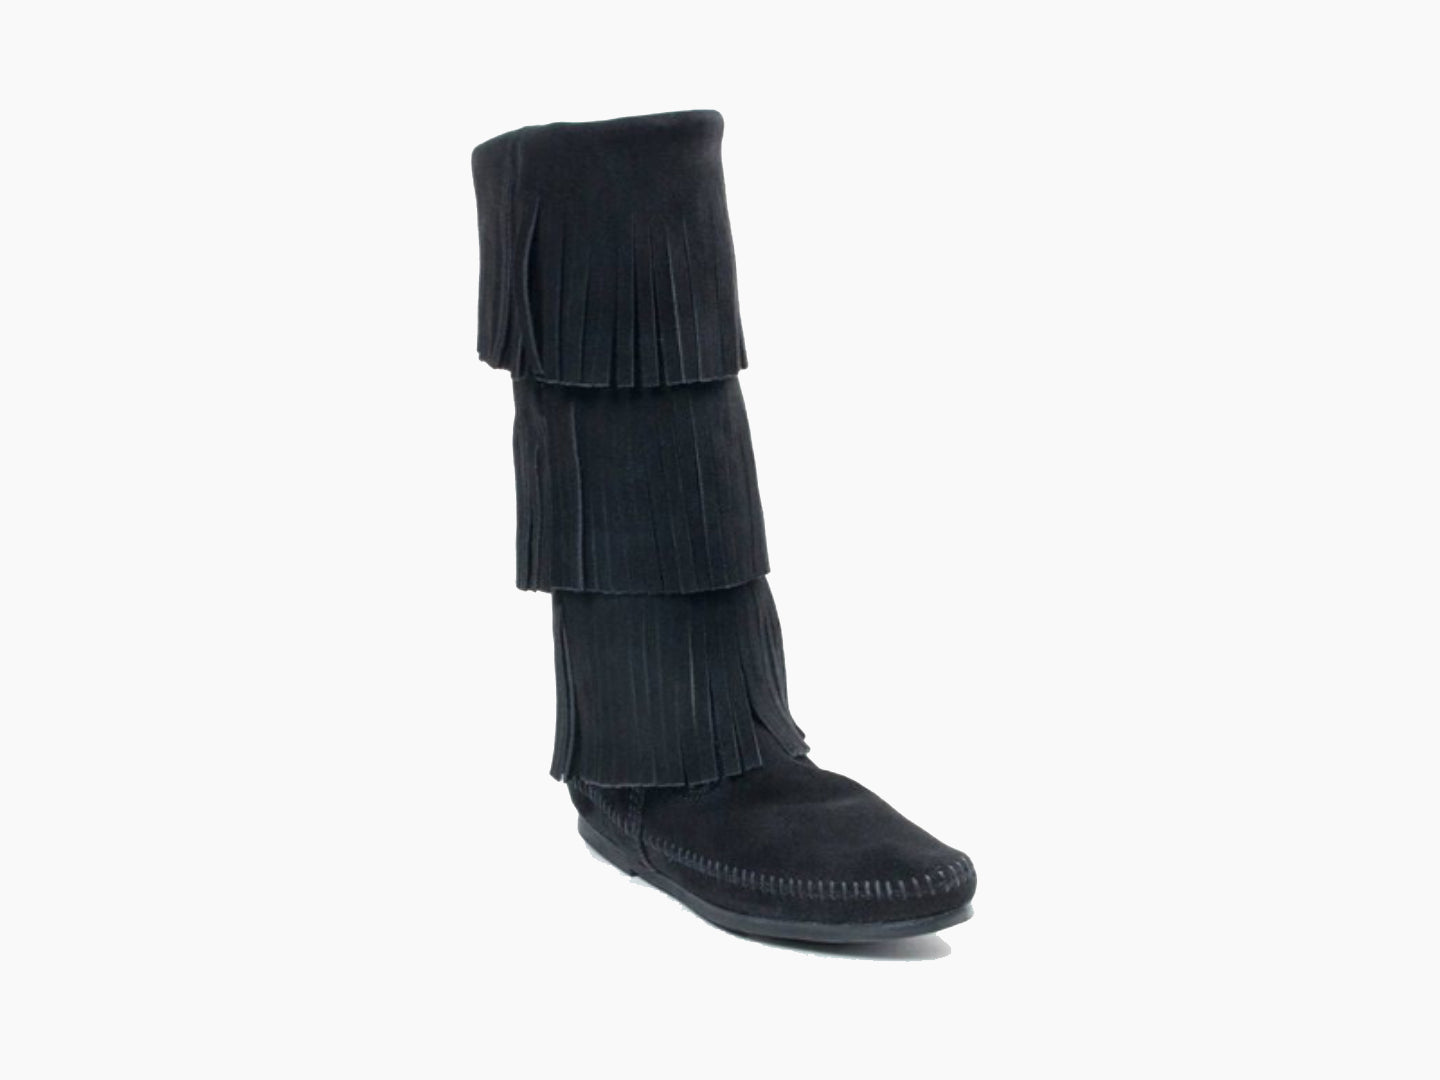 3-Layer Fringe Boot in Black from 3/4 Angle View